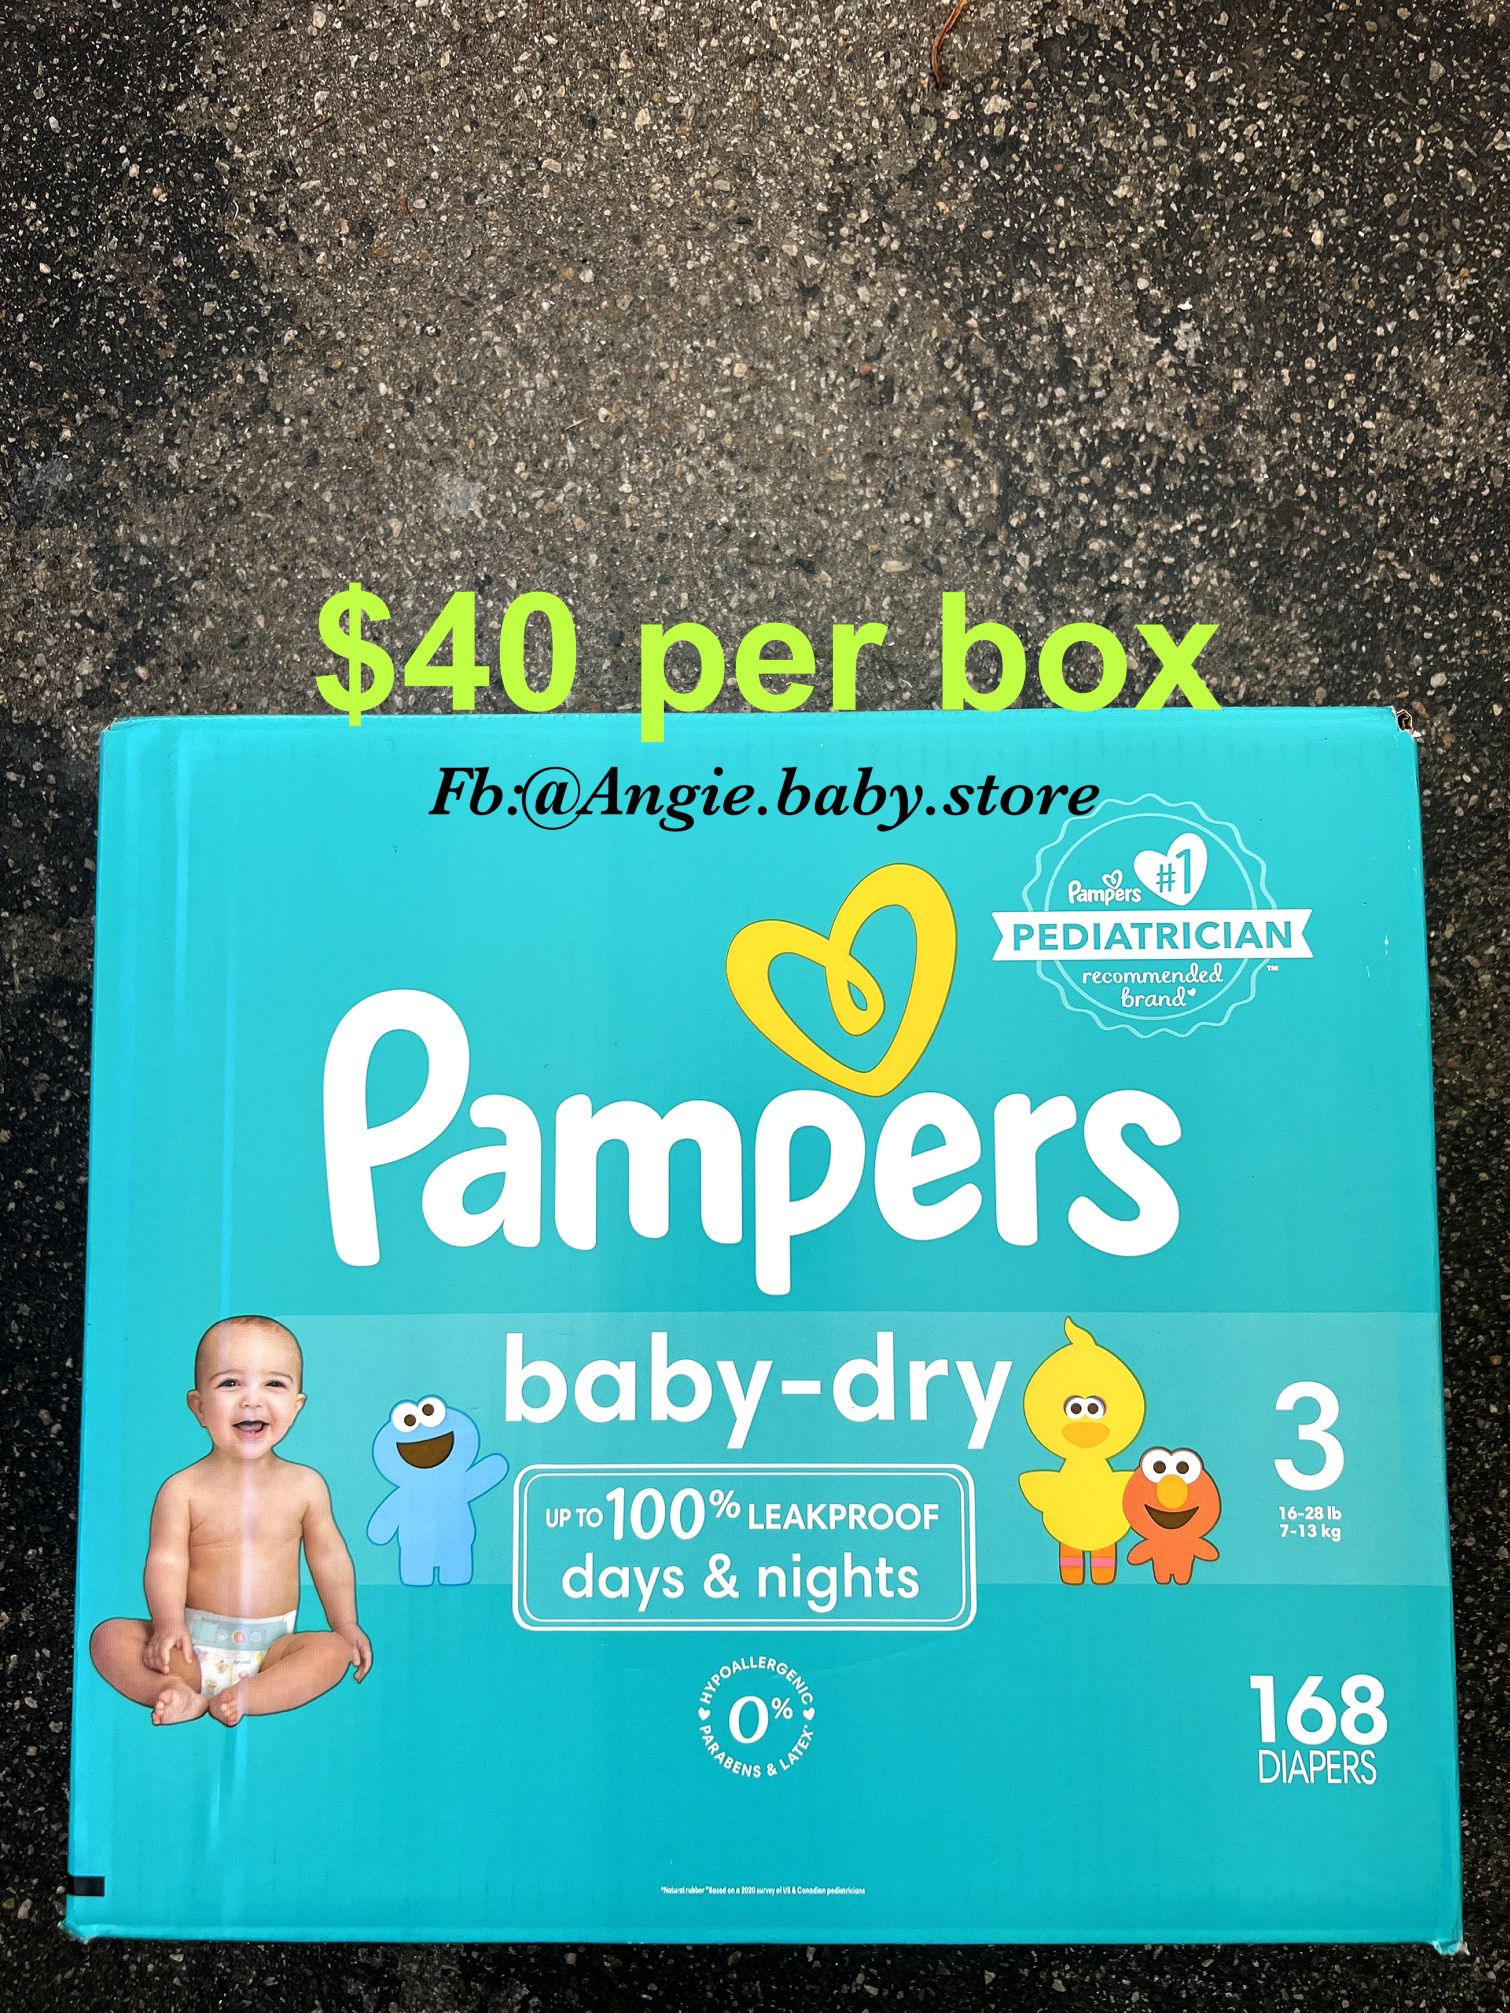 Pampers Baby Dry Size 3